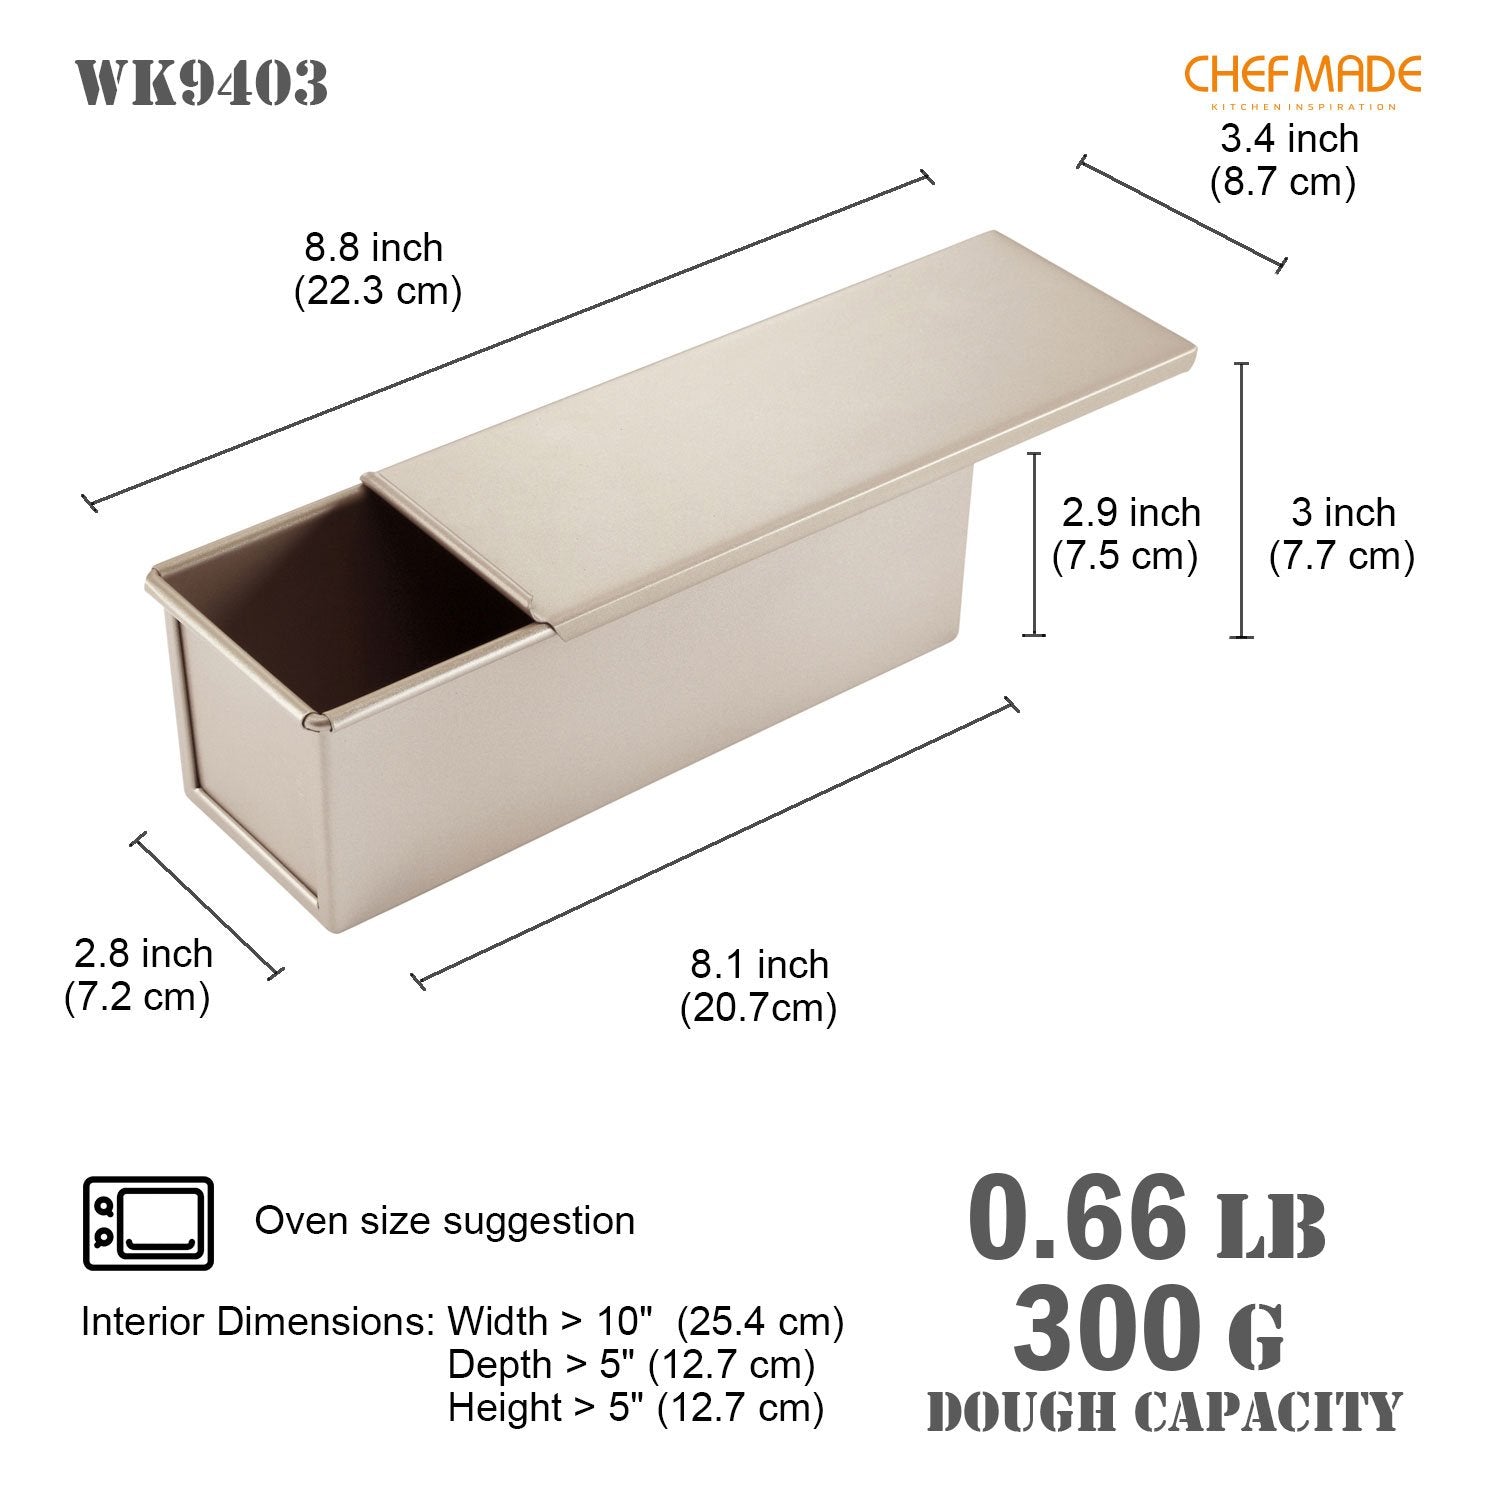 CHEFMADE 300g Non-Stick Loaf Pan with Cover (WK9403)